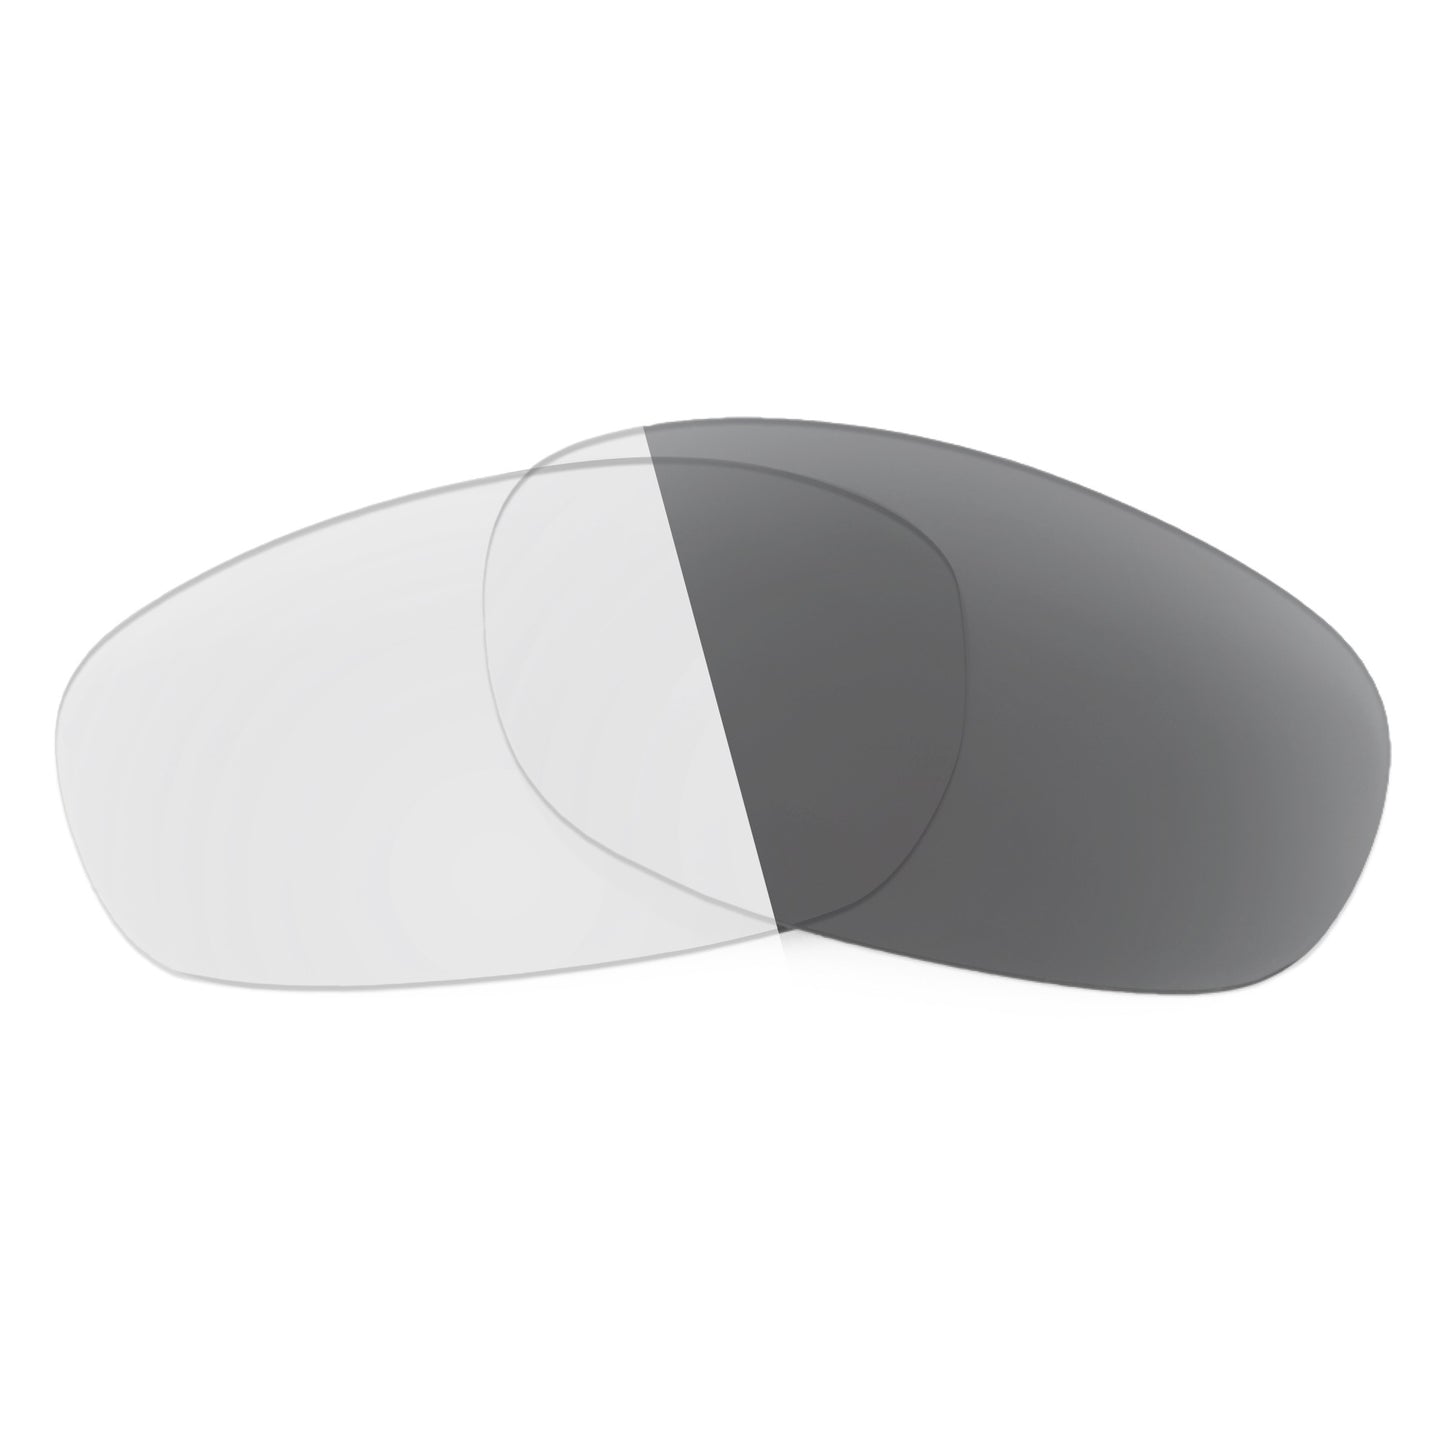 Revant replacement lenses for Maui Jim North Point MJ272 Non-Polarized Adapt Gray Photochromic